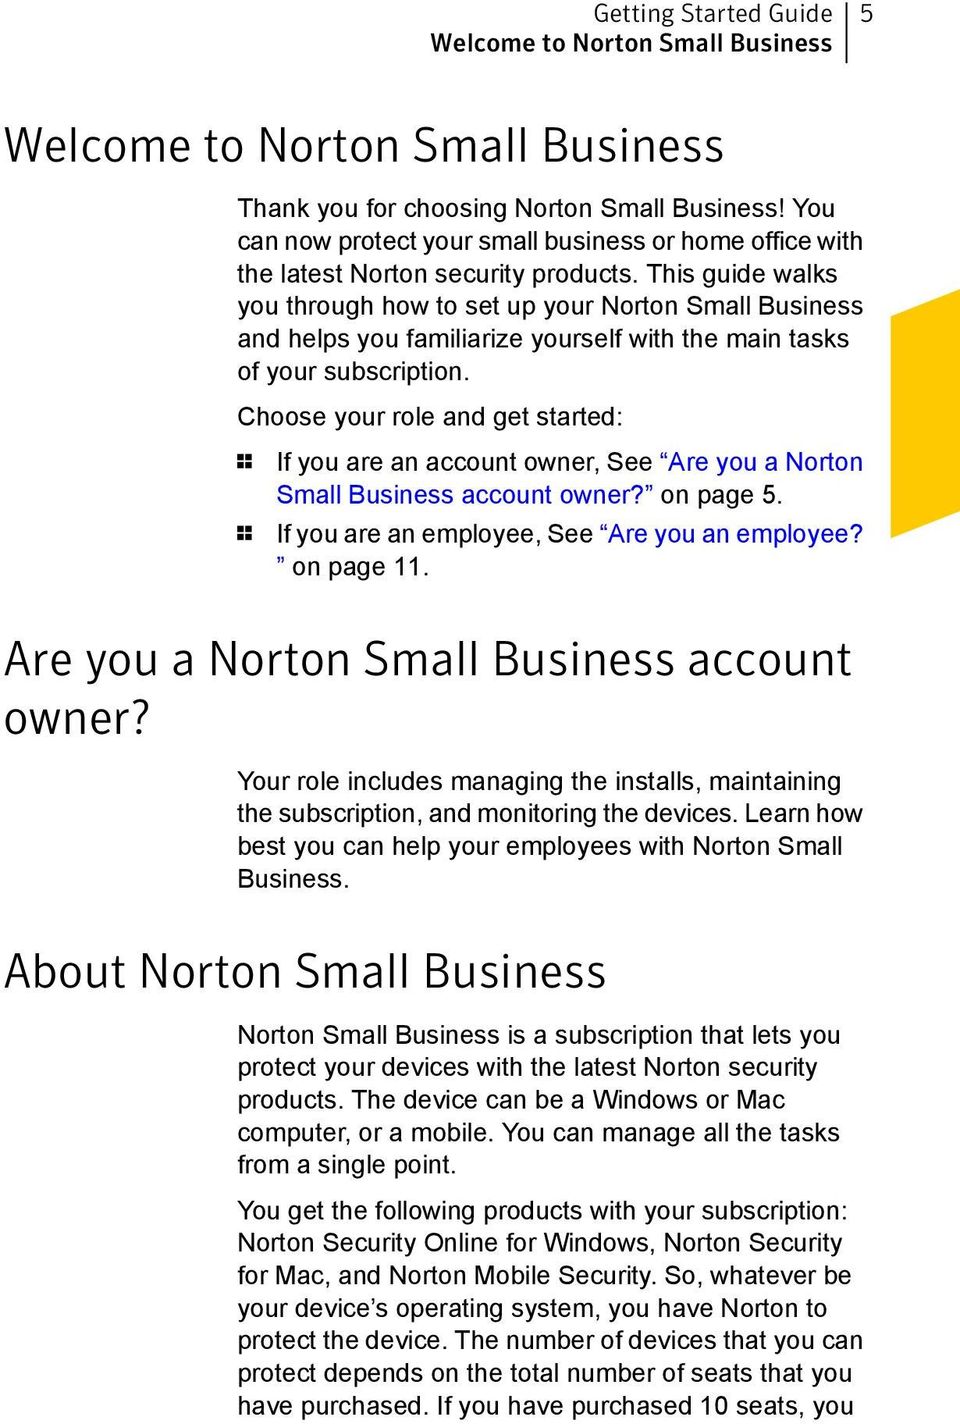 This guide walks you through how to set up your Norton Small Business and helps you familiarize yourself with the main tasks of your subscription.